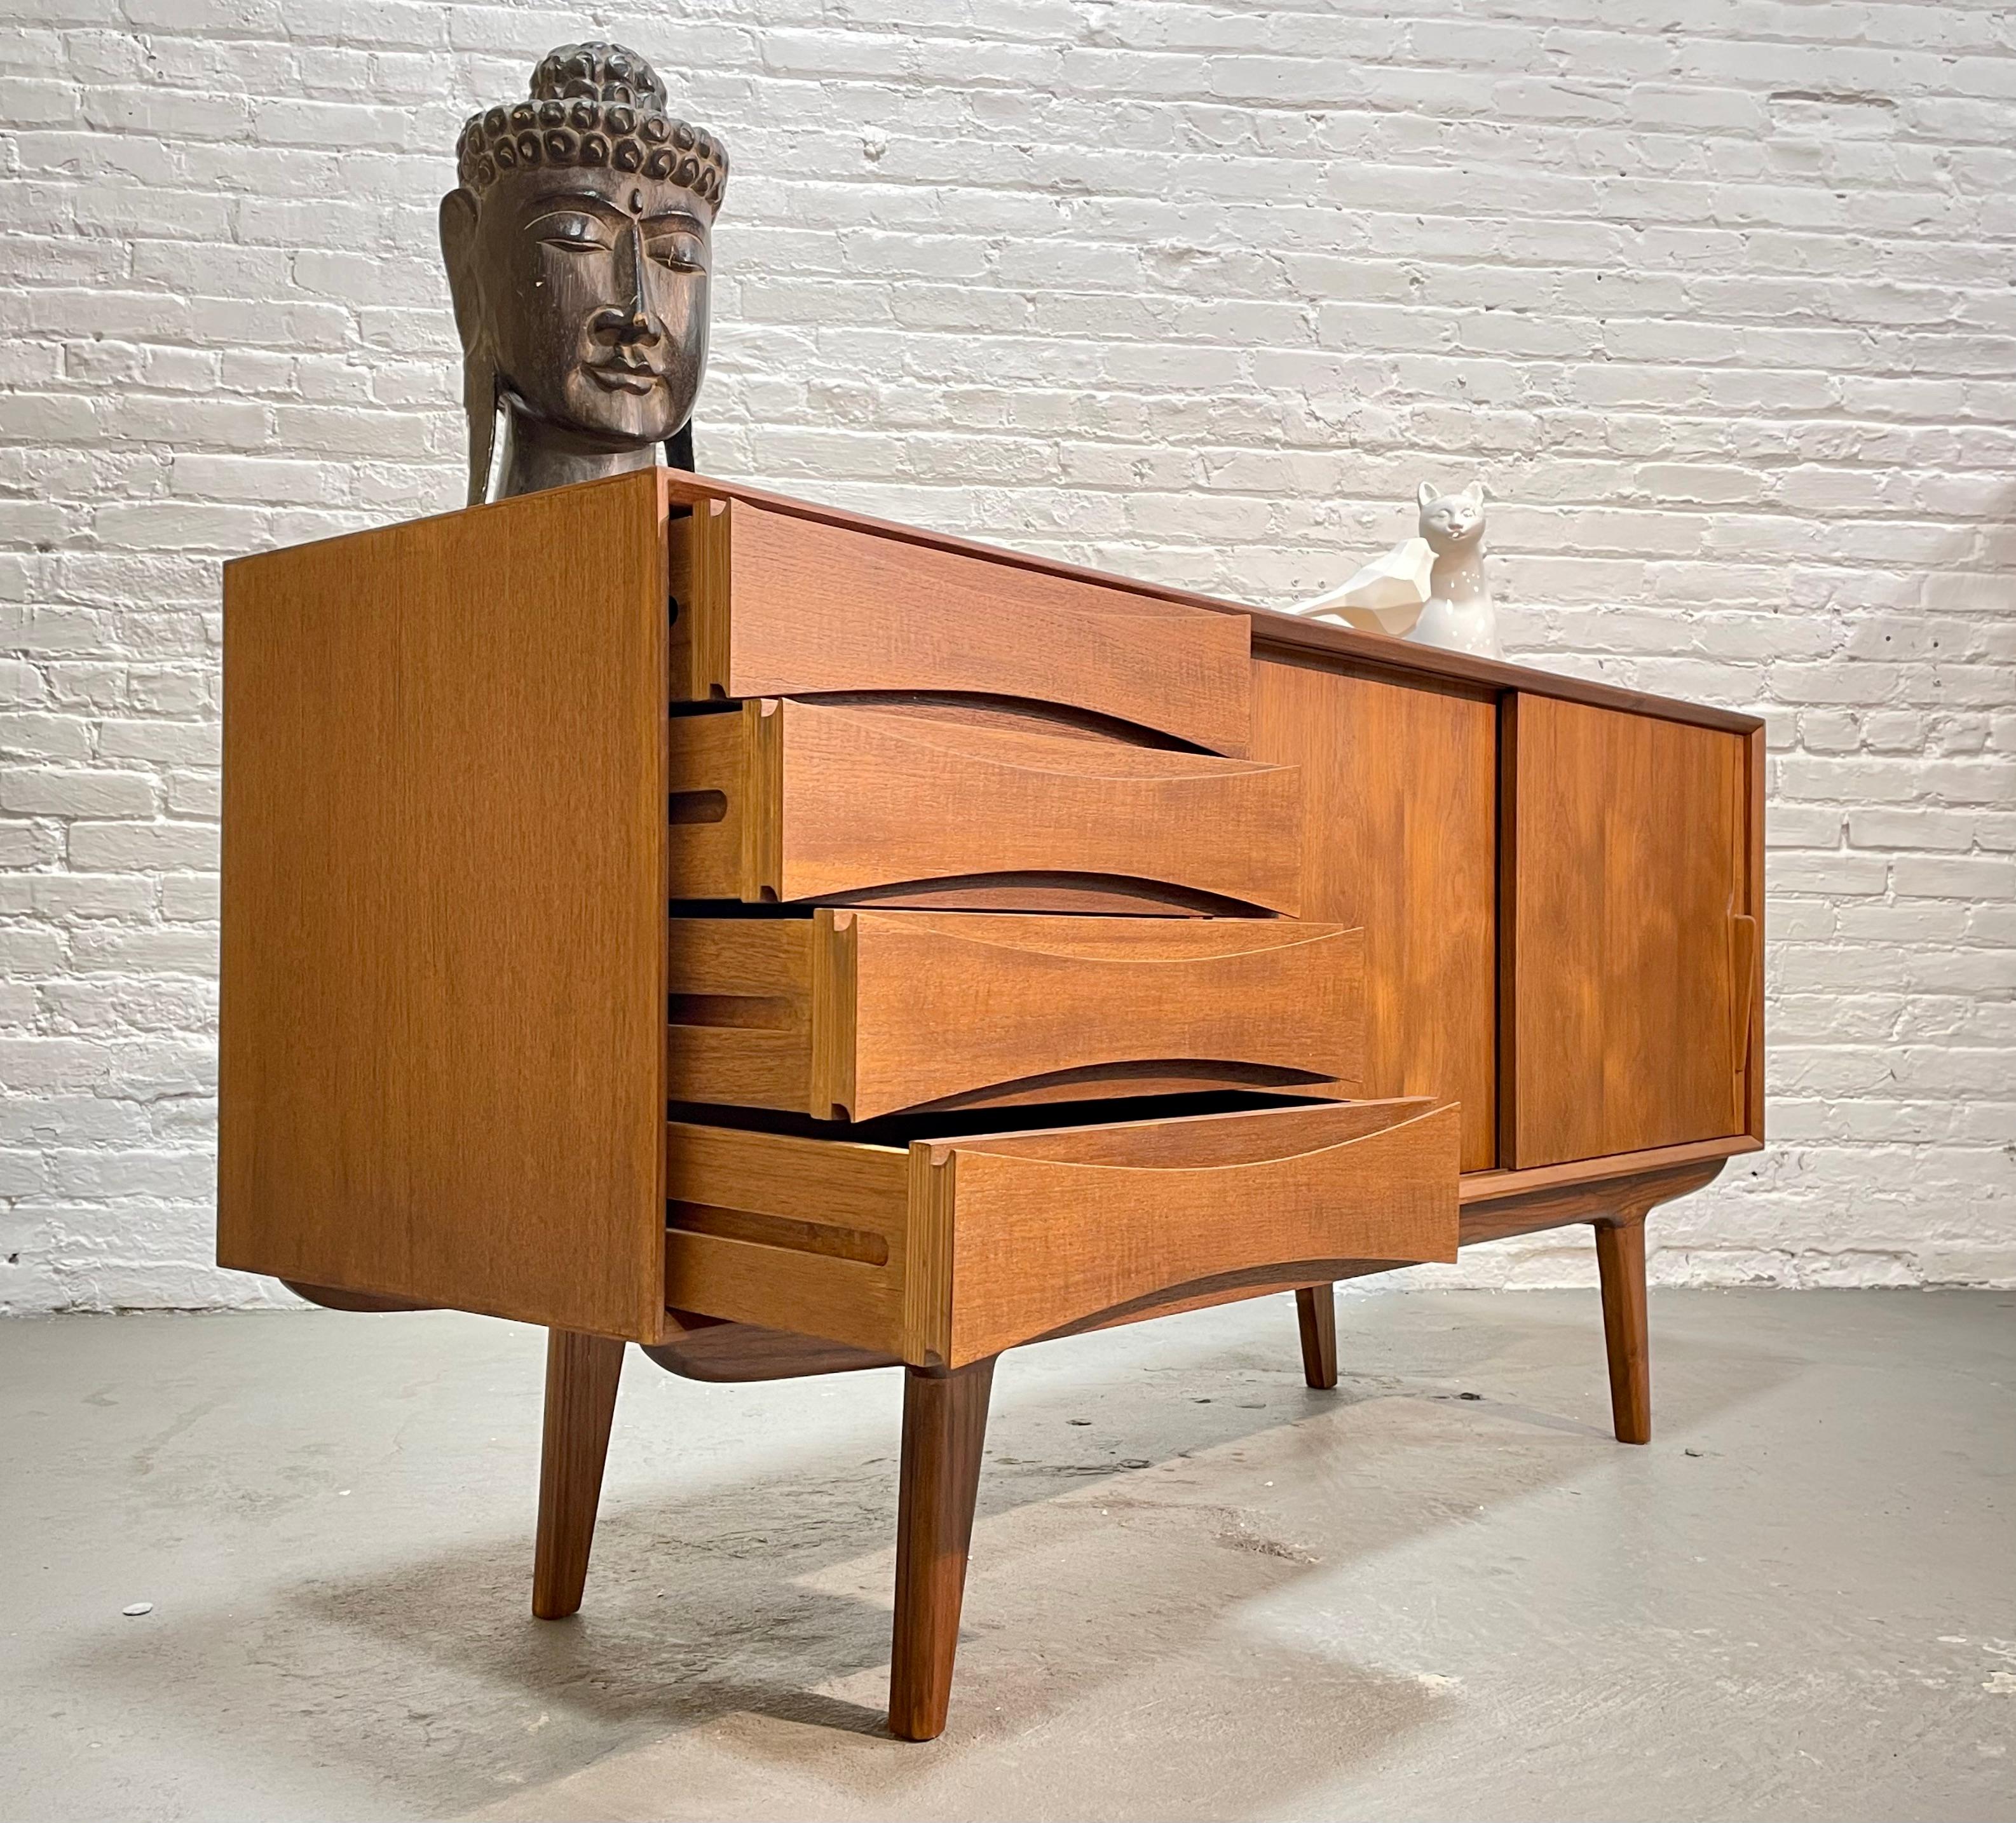  Handsome Mid Century MODERN styled SIDEBOARD / CREDENZA media stand 4